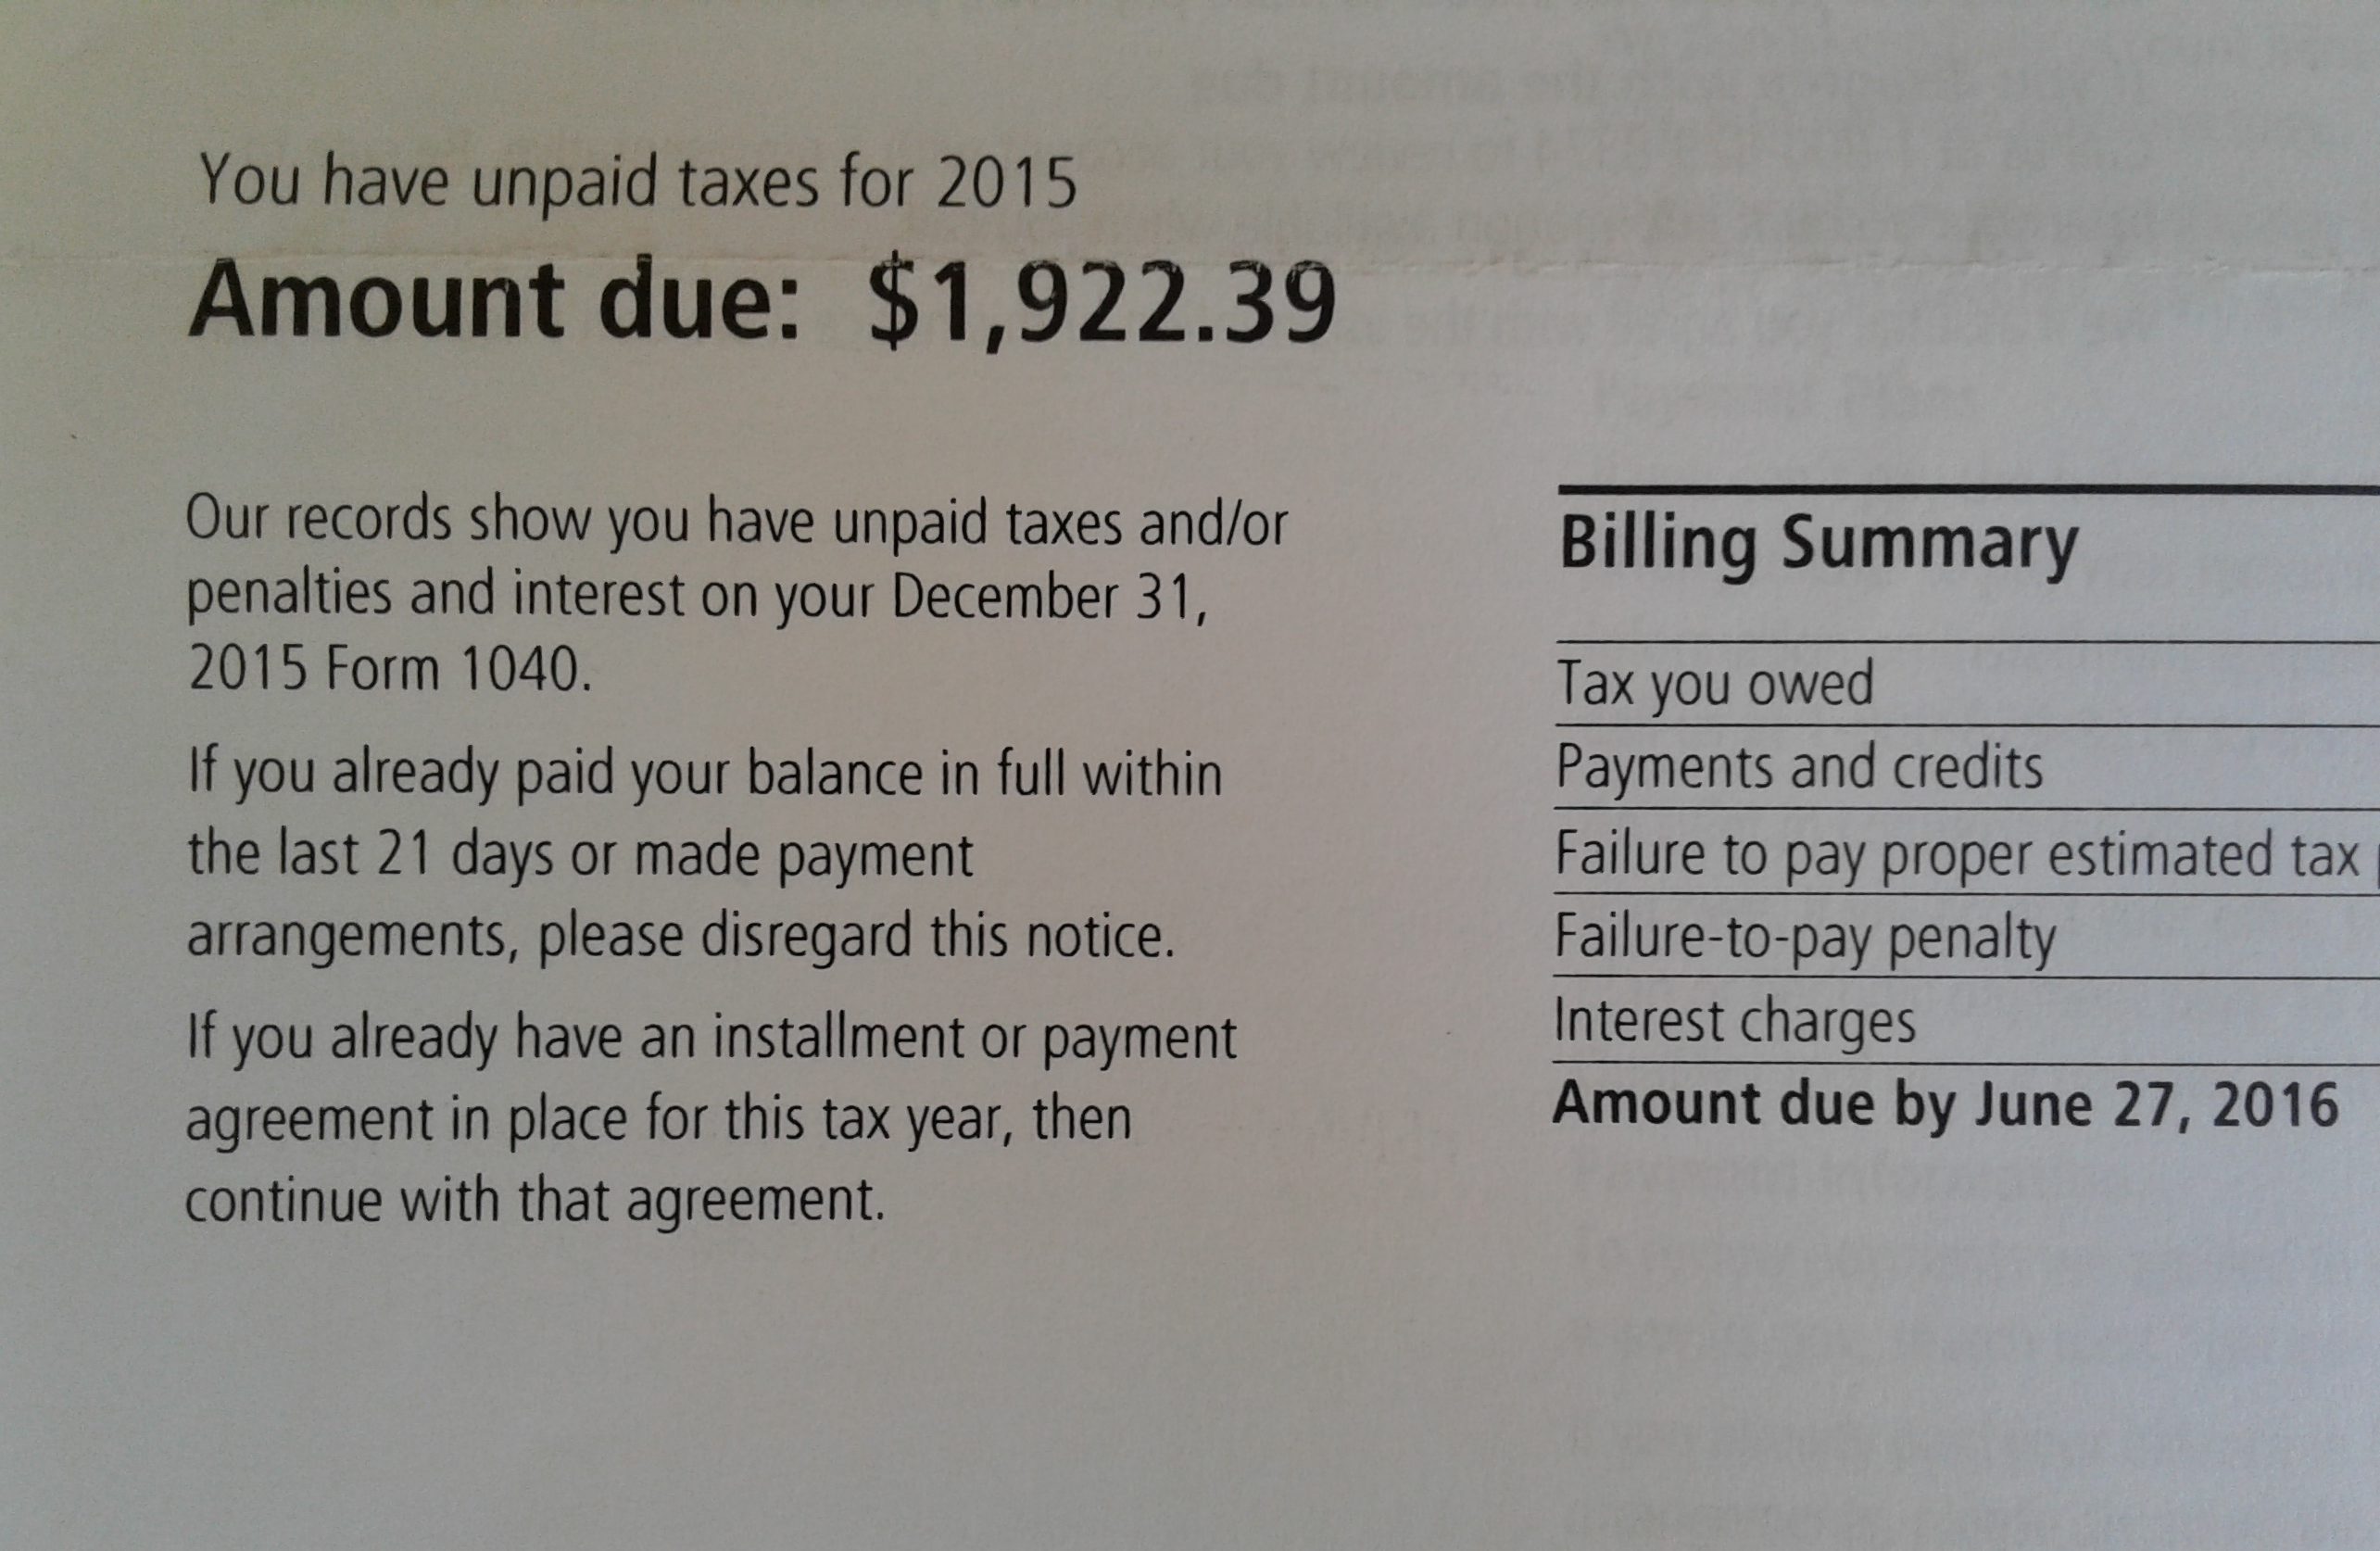 image of IRS letter with heading "You have unpaid taxes for 2015 - Amount due: $1,922.39"